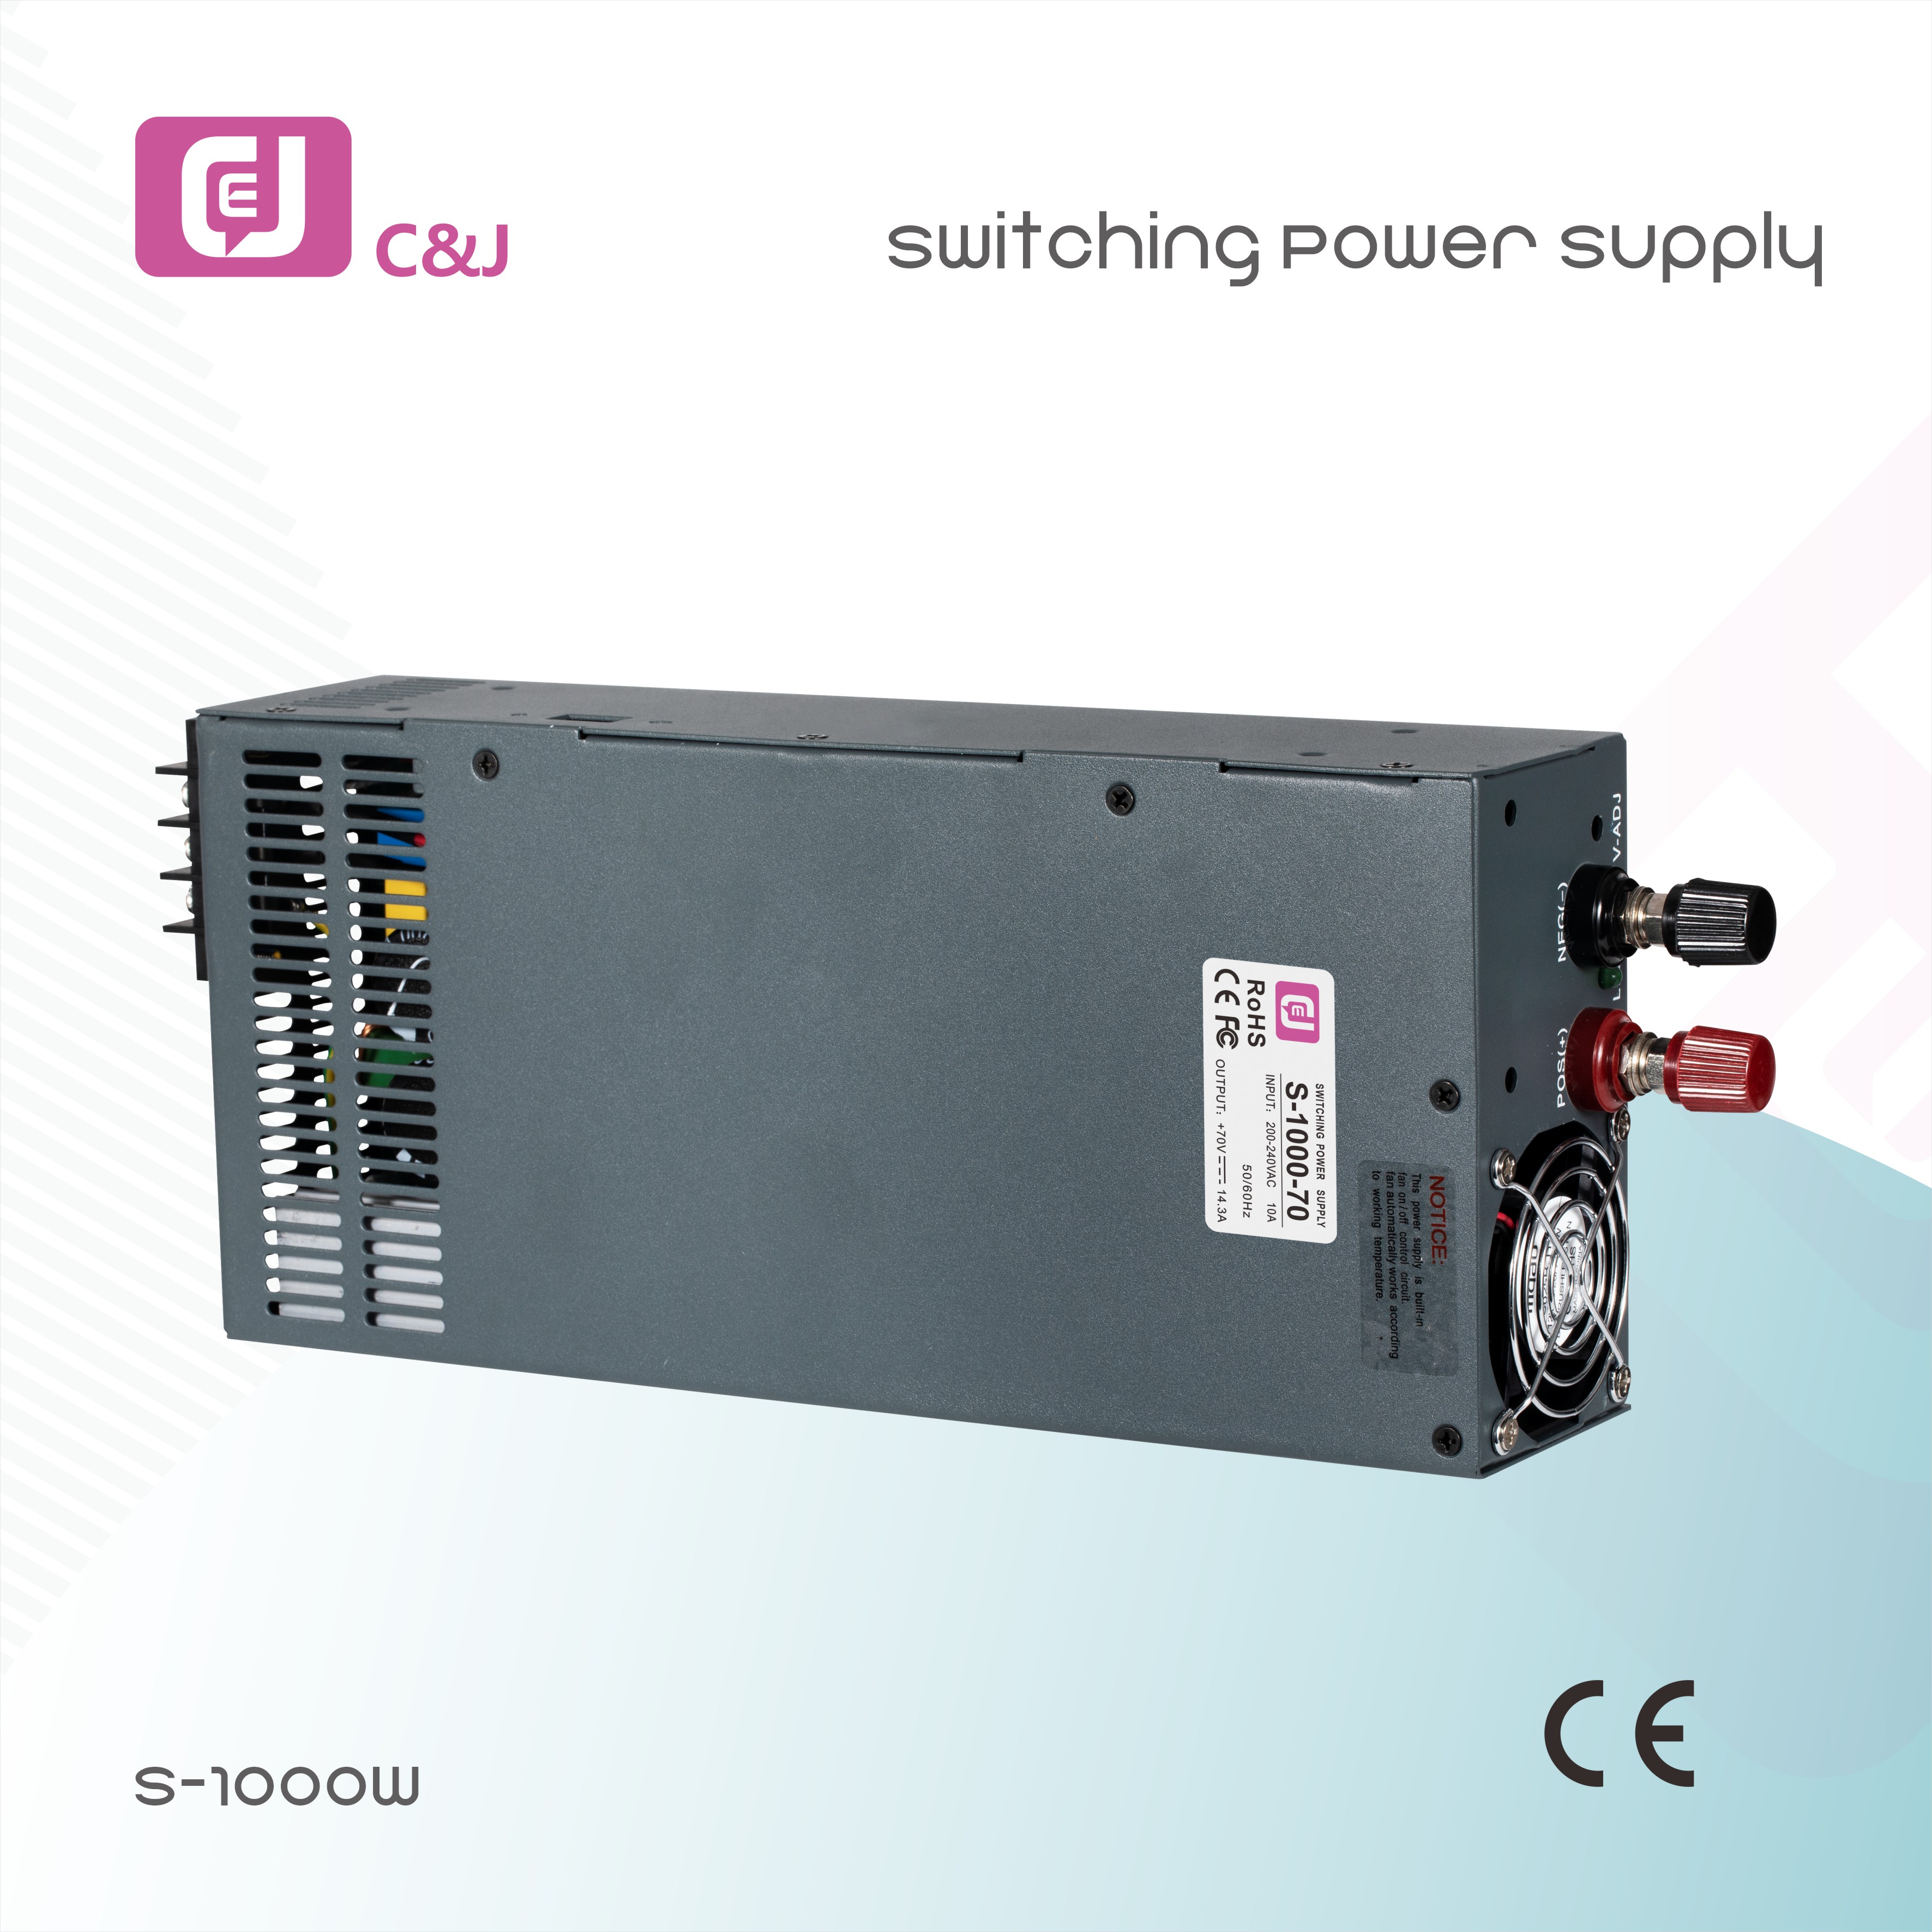 Switching Power Supplies: Revolutionizing Energy Efficiency in Electronic Devices